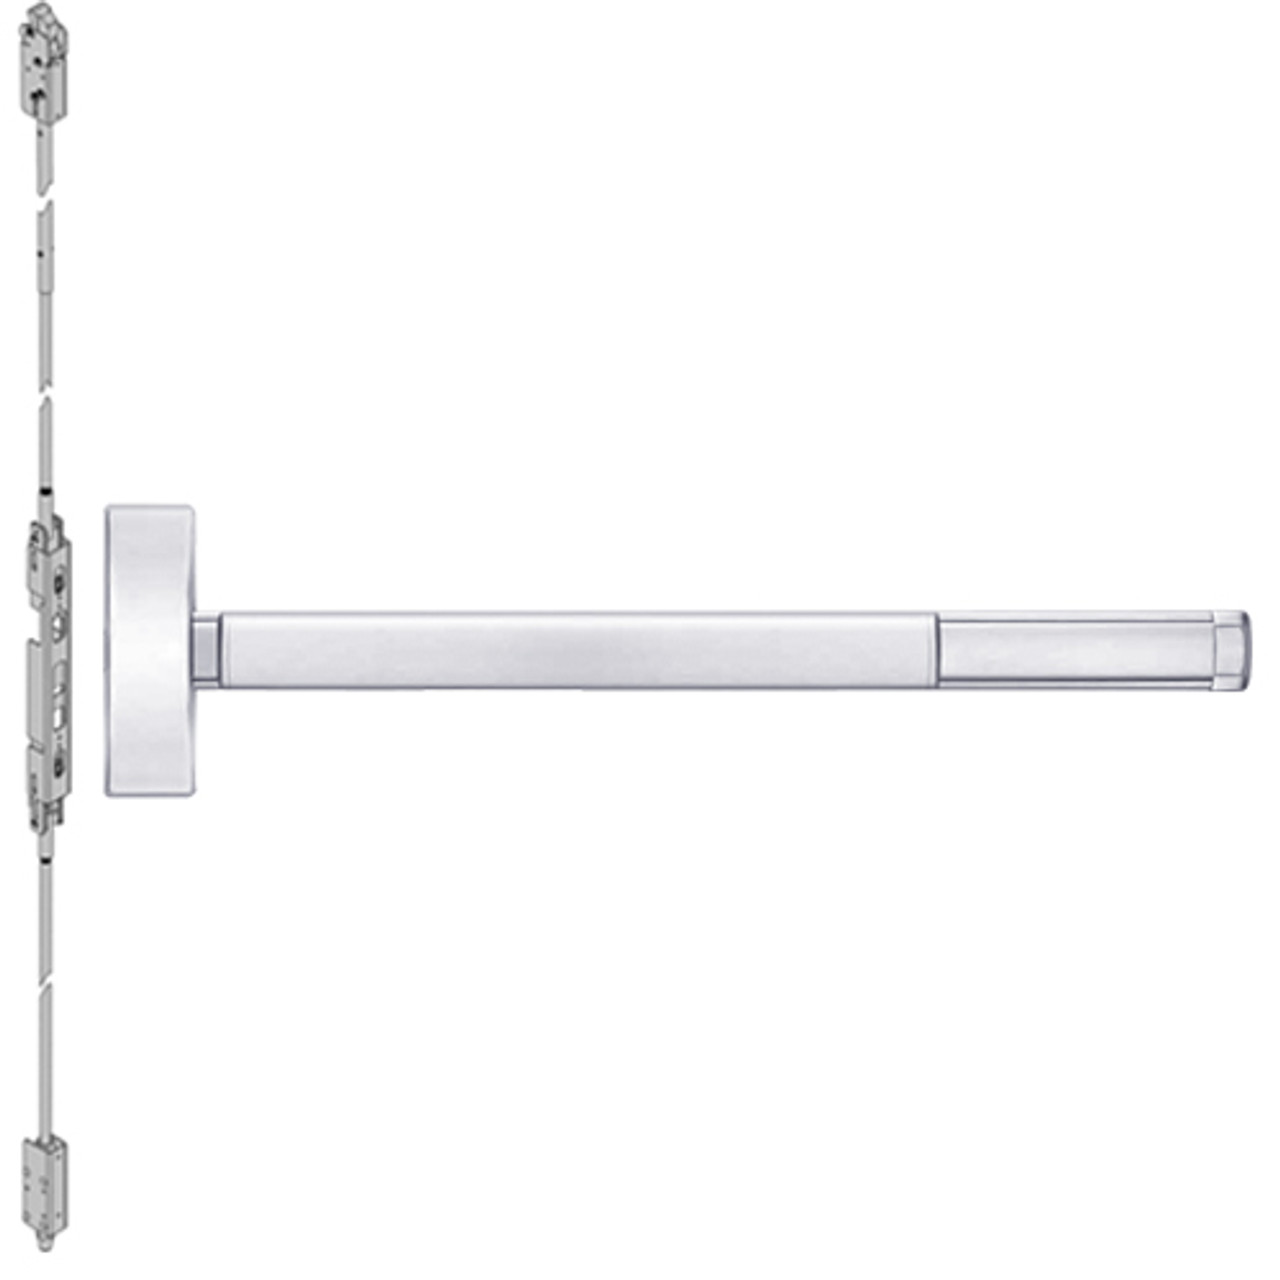 DE2801-625-48 PHI 2800 Series Concealed Vertical Rod Exit Device with Delayed Egress Prepped for Cover Plate in Bright Chrome Finish